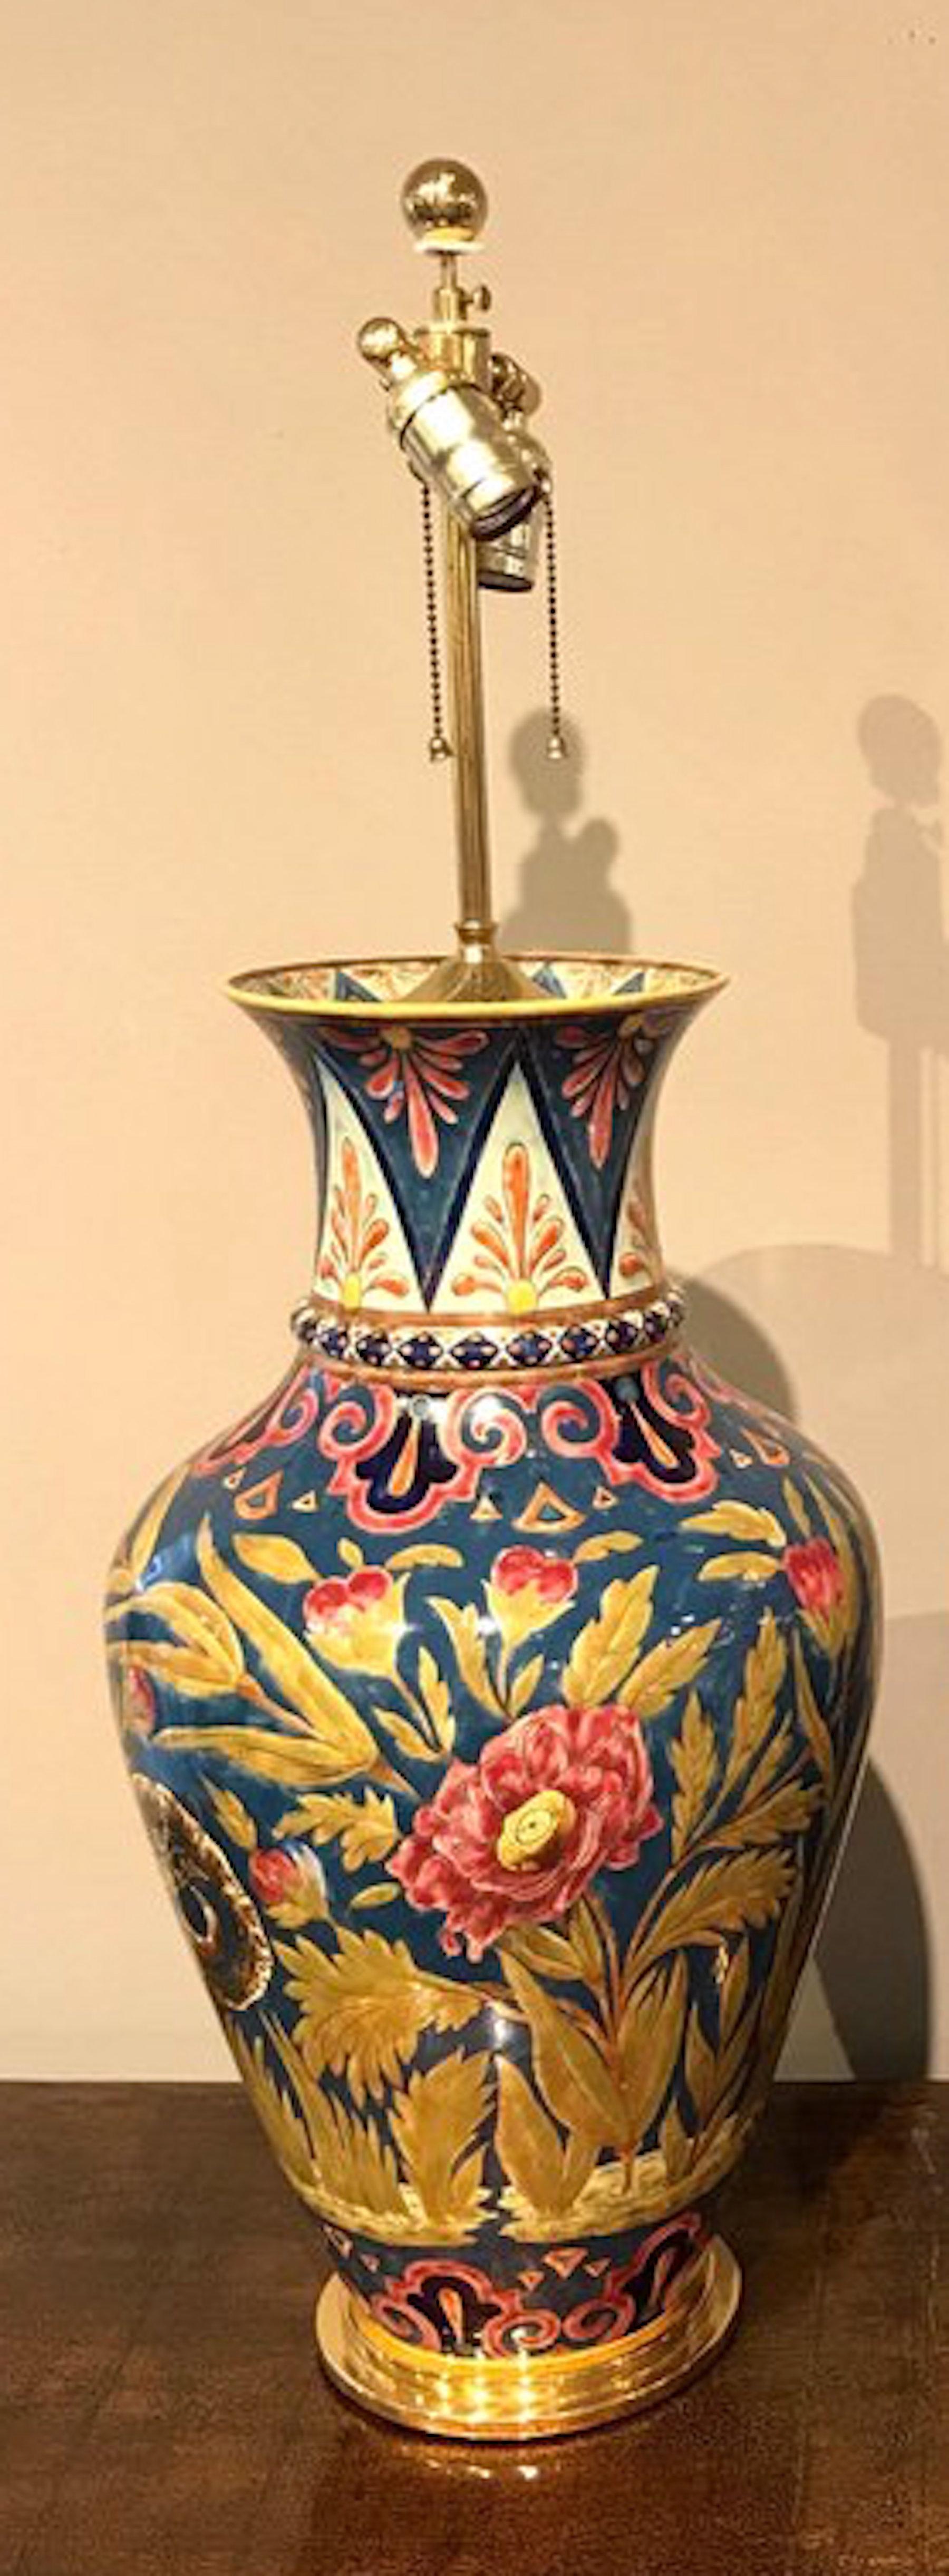 A large stunning attributed to Zsolnay porcelain floral vases now as lamps. All-over typical enameled and painted floral decoration, with brass mounts. Professionally drilled for electrification, no chips cracks or repairs. New wiring. Measures: